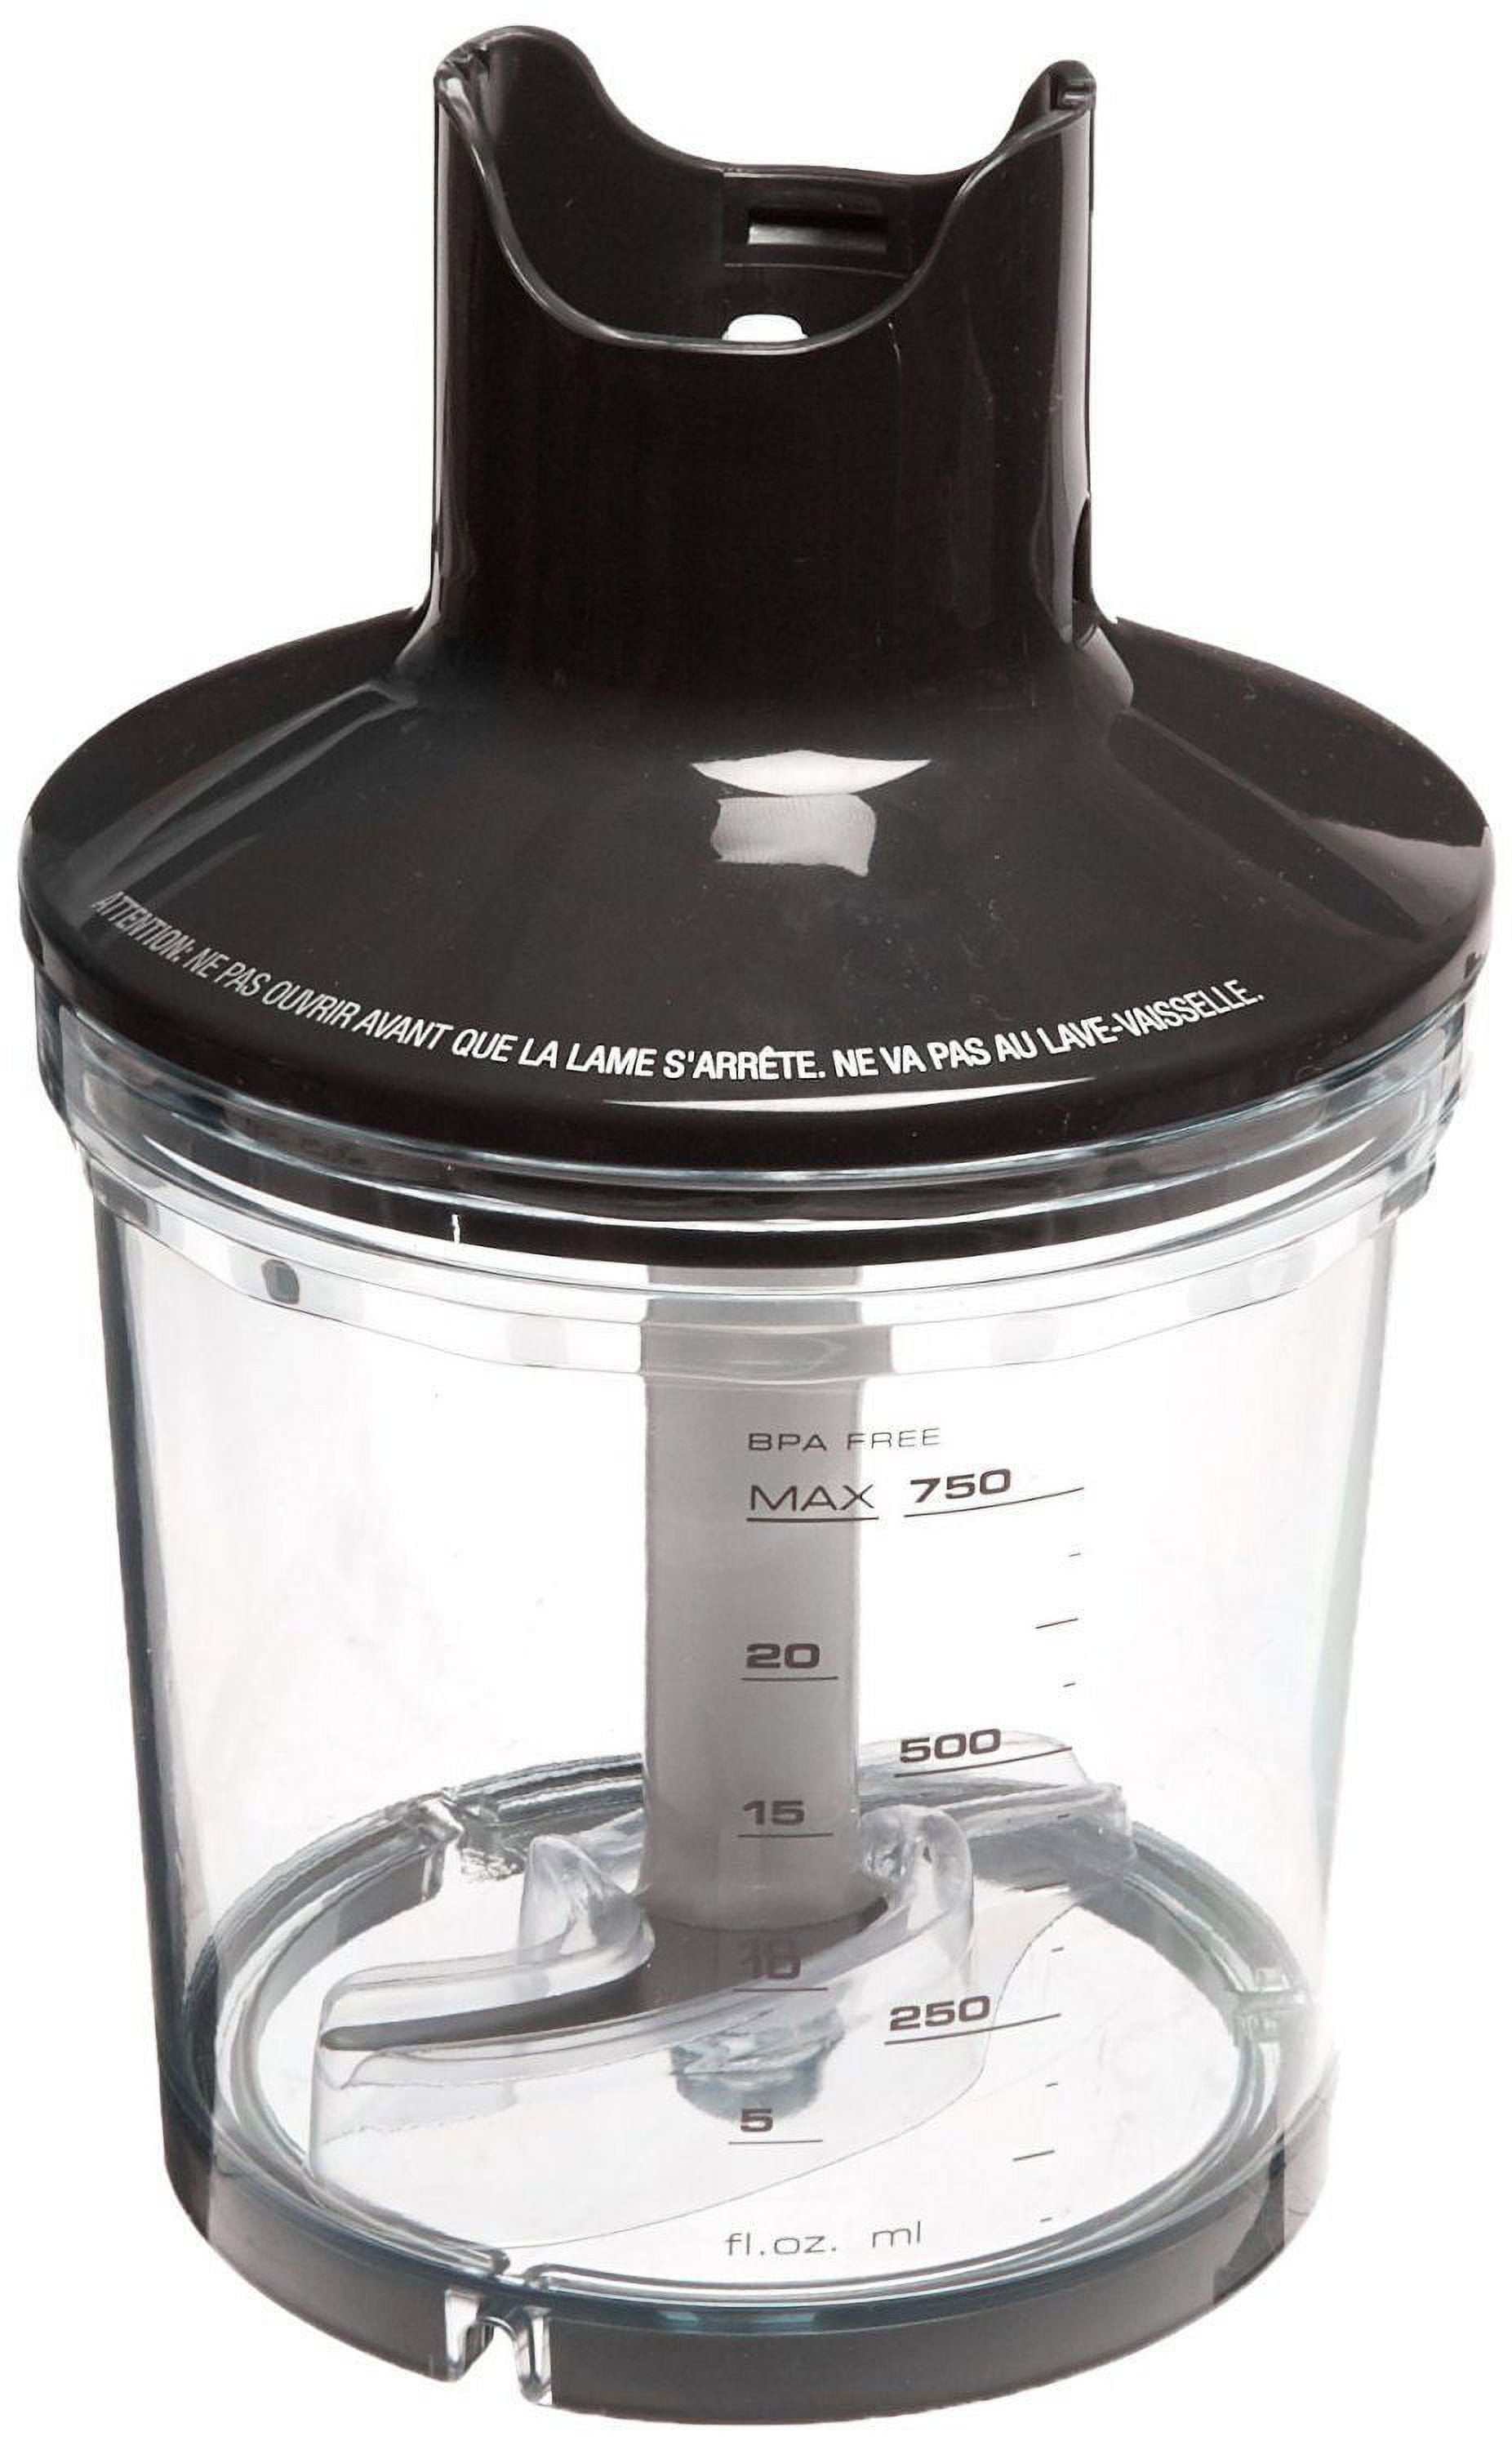 Breville Control Grip BSB510XL Blender Review - Consumer Reports